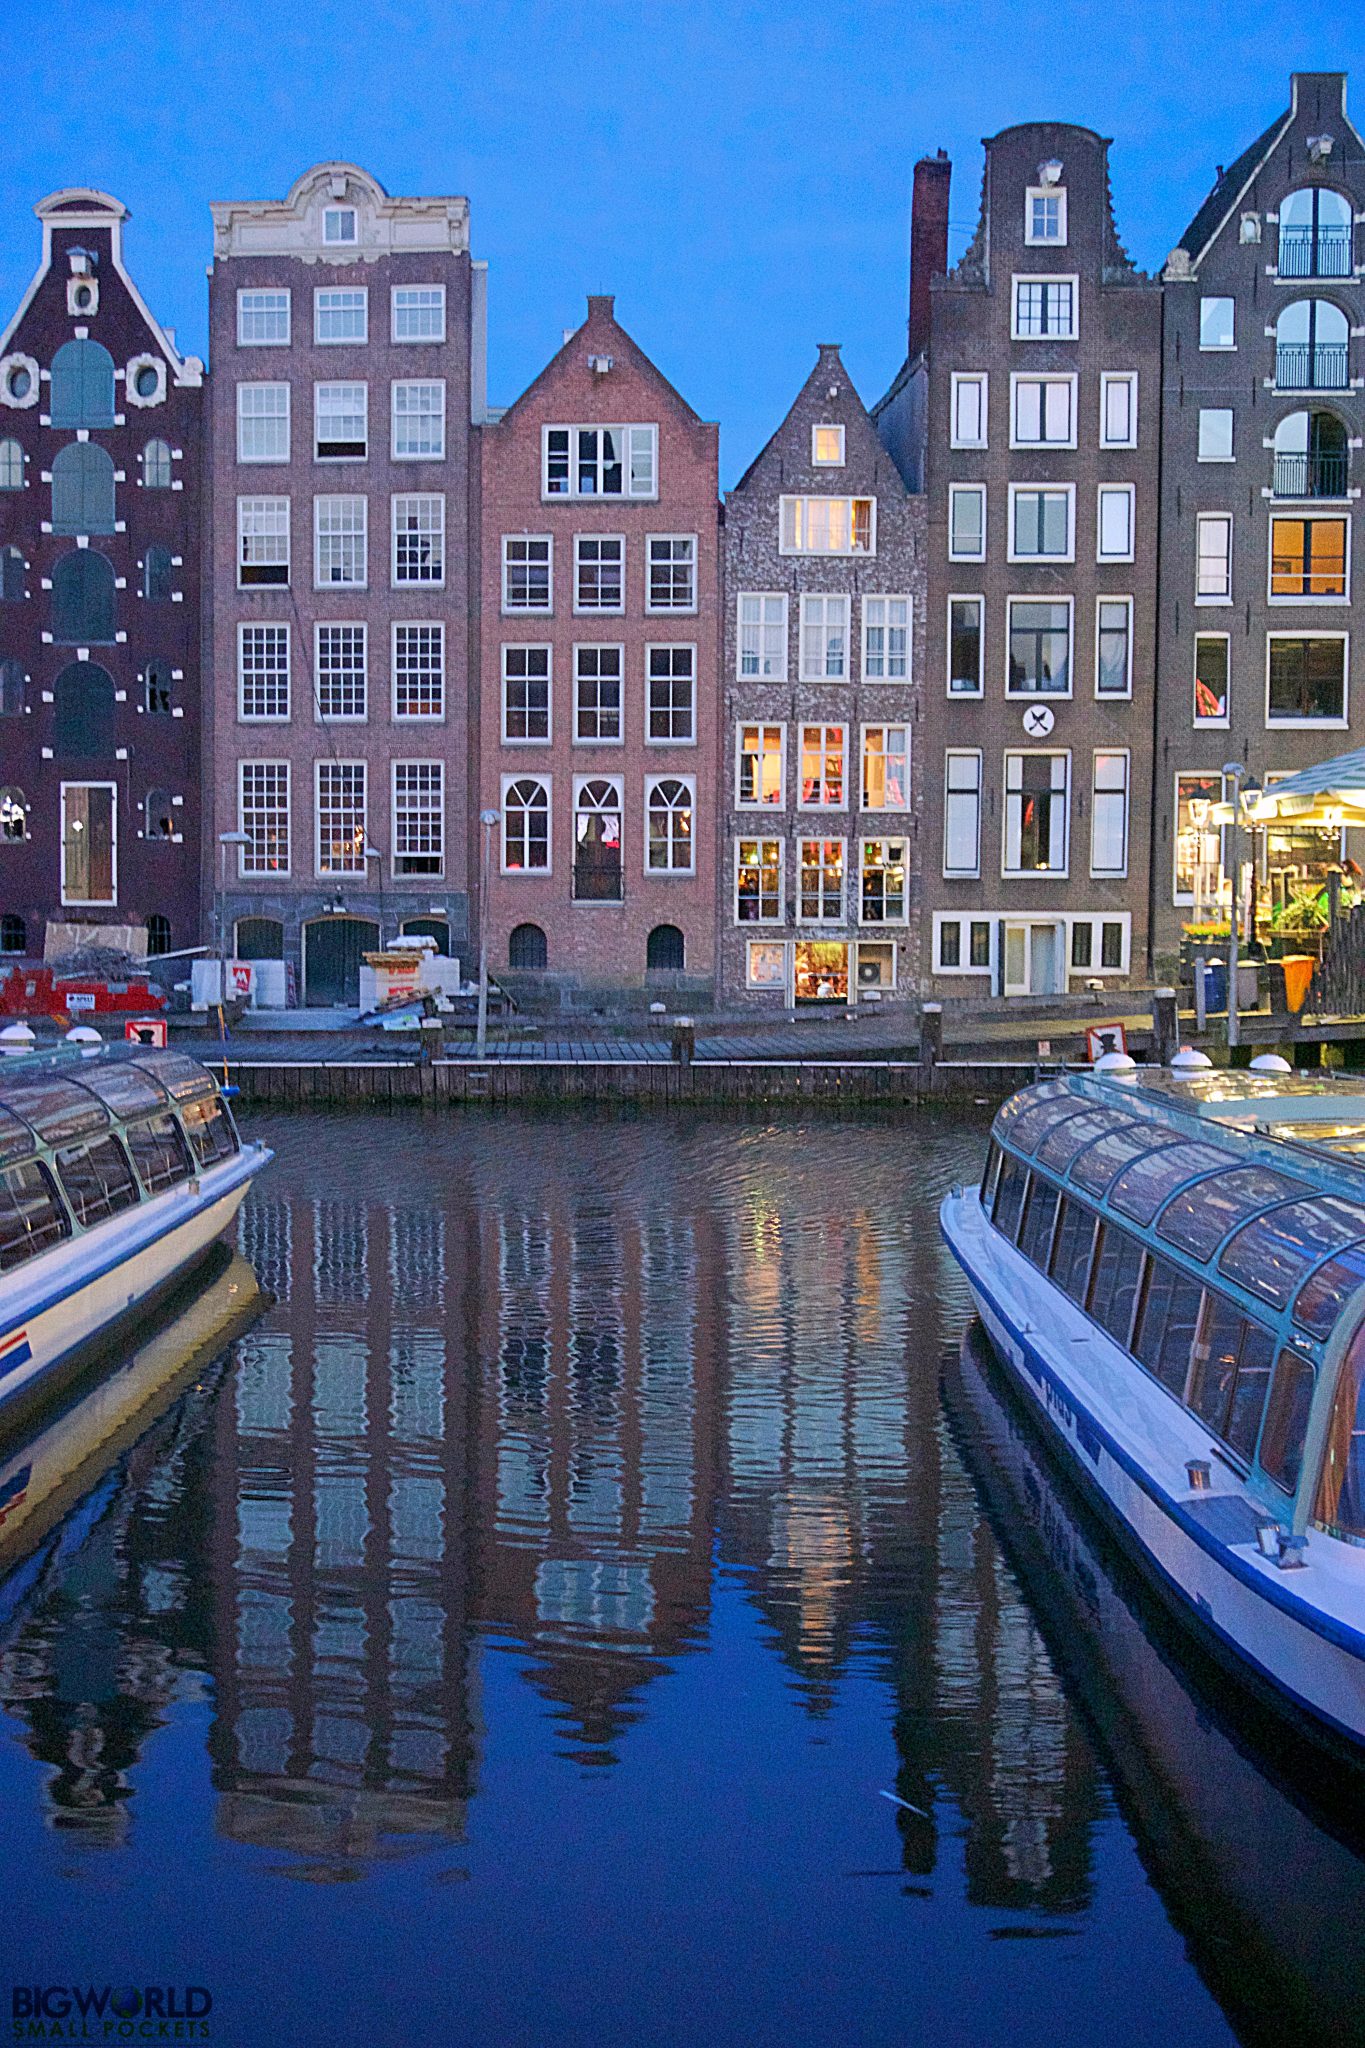 72hrs in Amsterdam … on a Budget! Your Perfect 3 Day Itinerary - Big